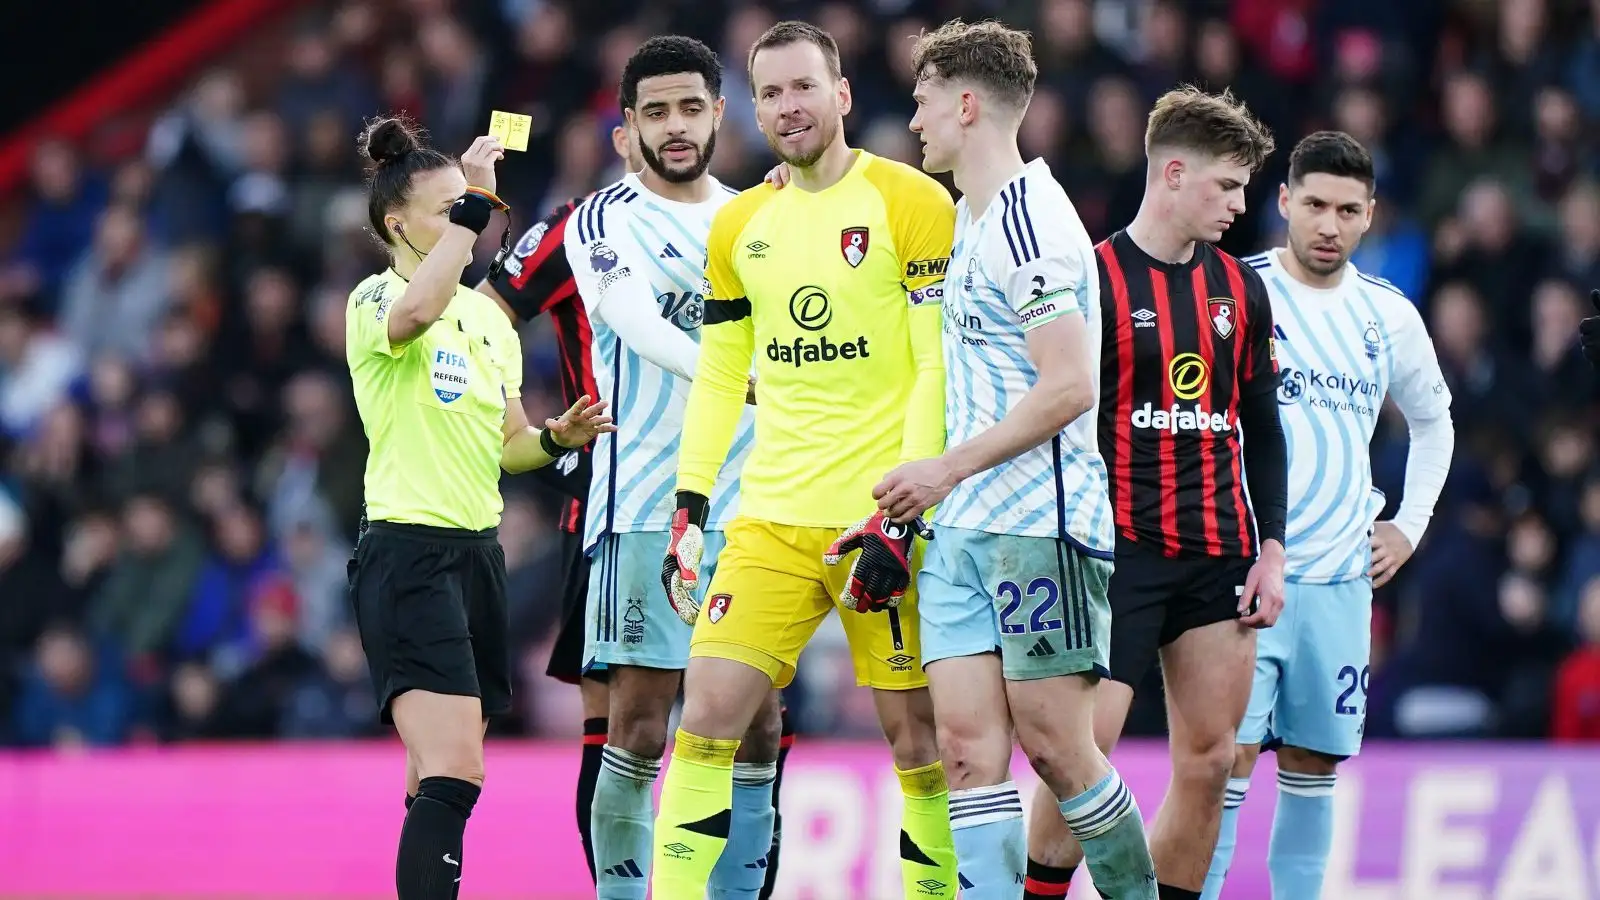 Bournemouth goalkeeper Neto receives a yellow card for dissent.